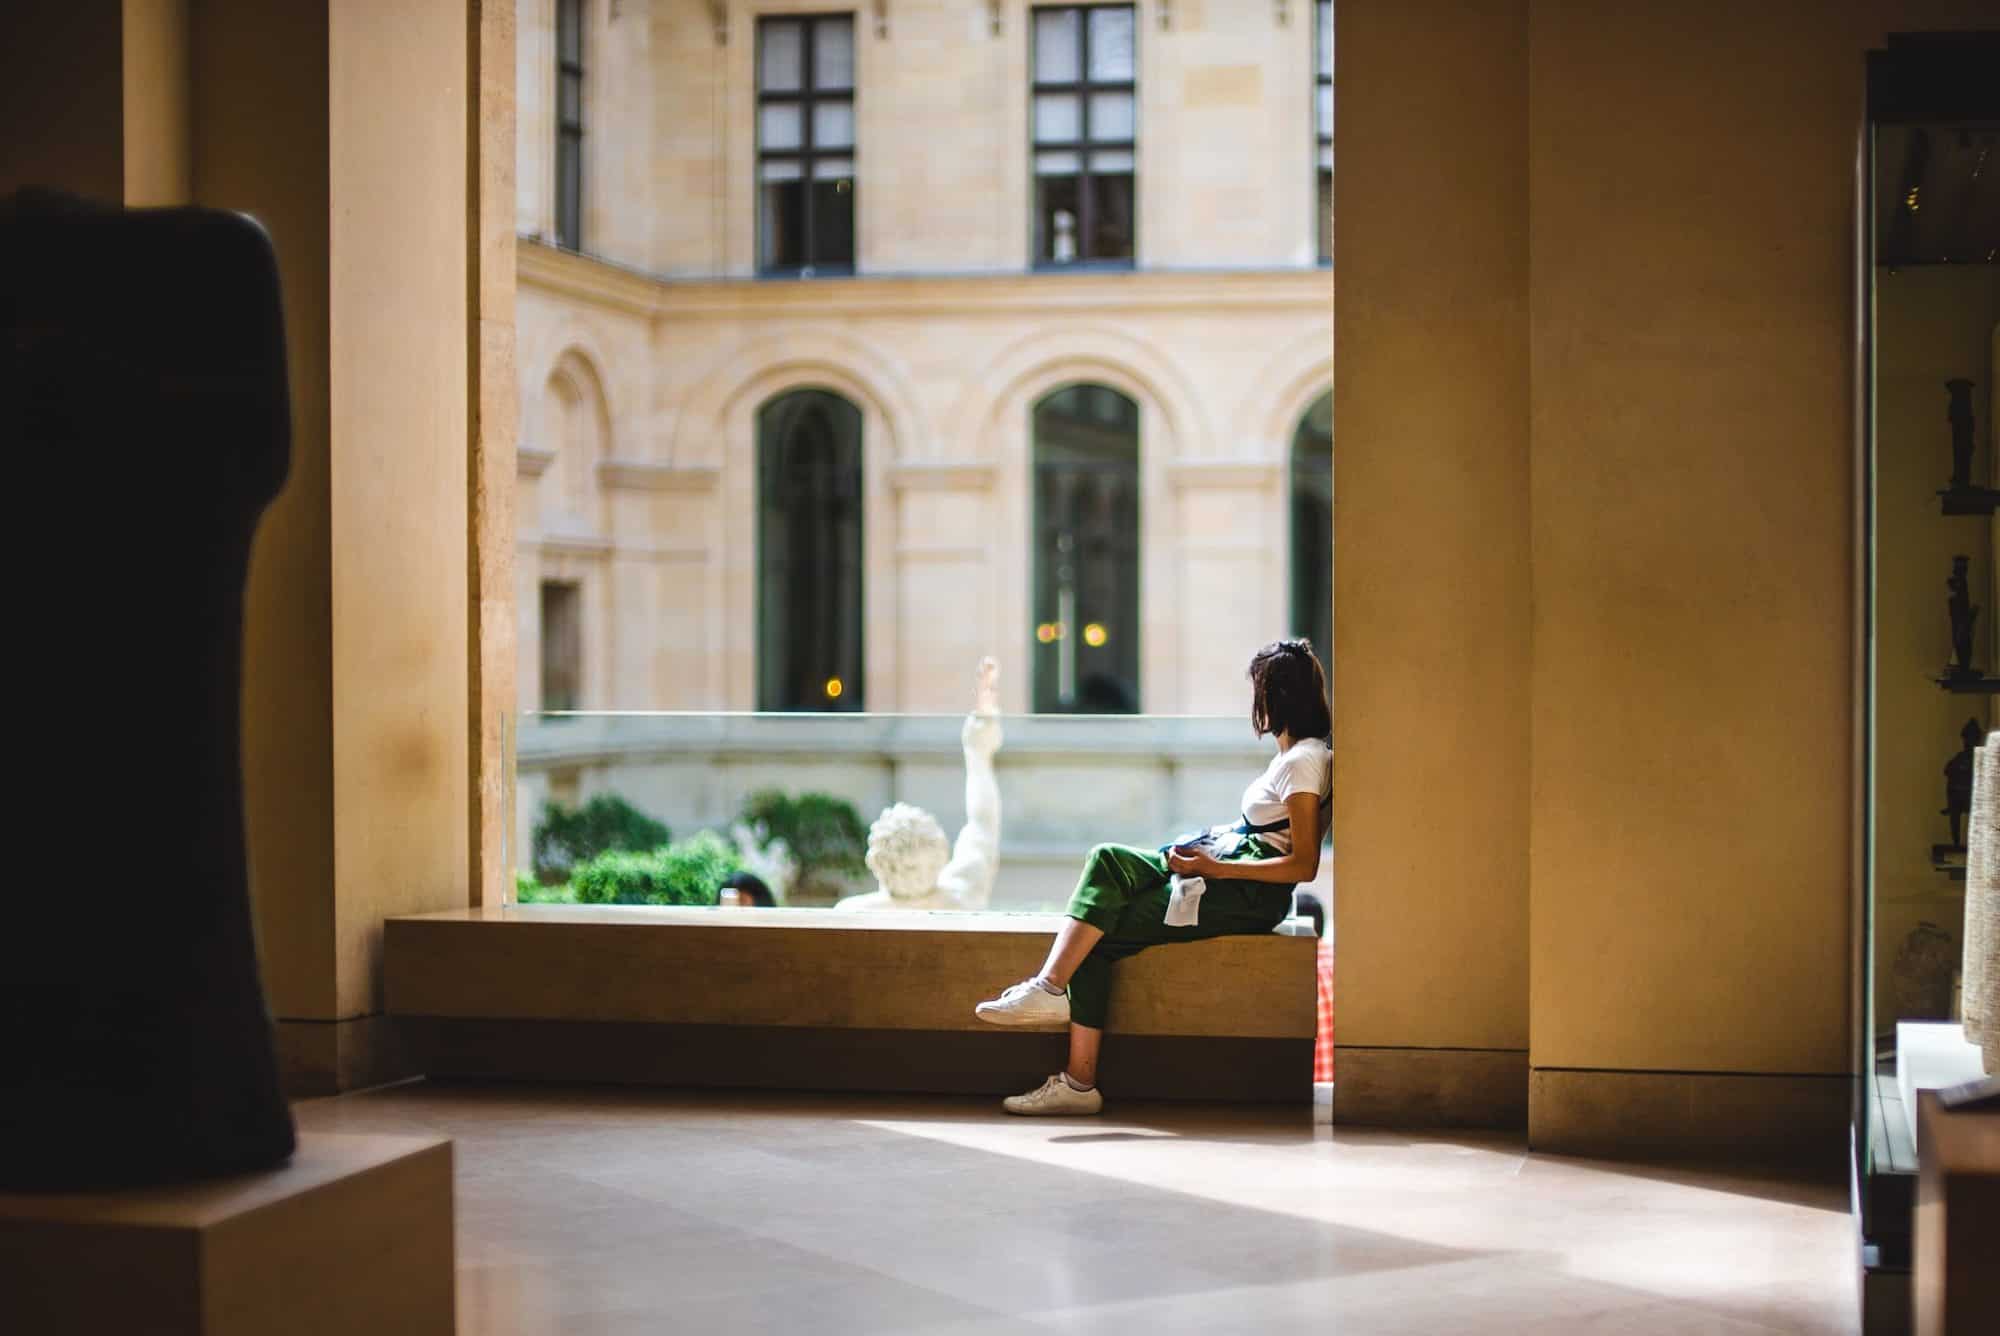 A brunette girl in a white t-shirt and green pants, wearing white sneakers, sitting on a bench seat in the Louvre Museum. She is looking away from the camera to an inner sculpture courtyard.